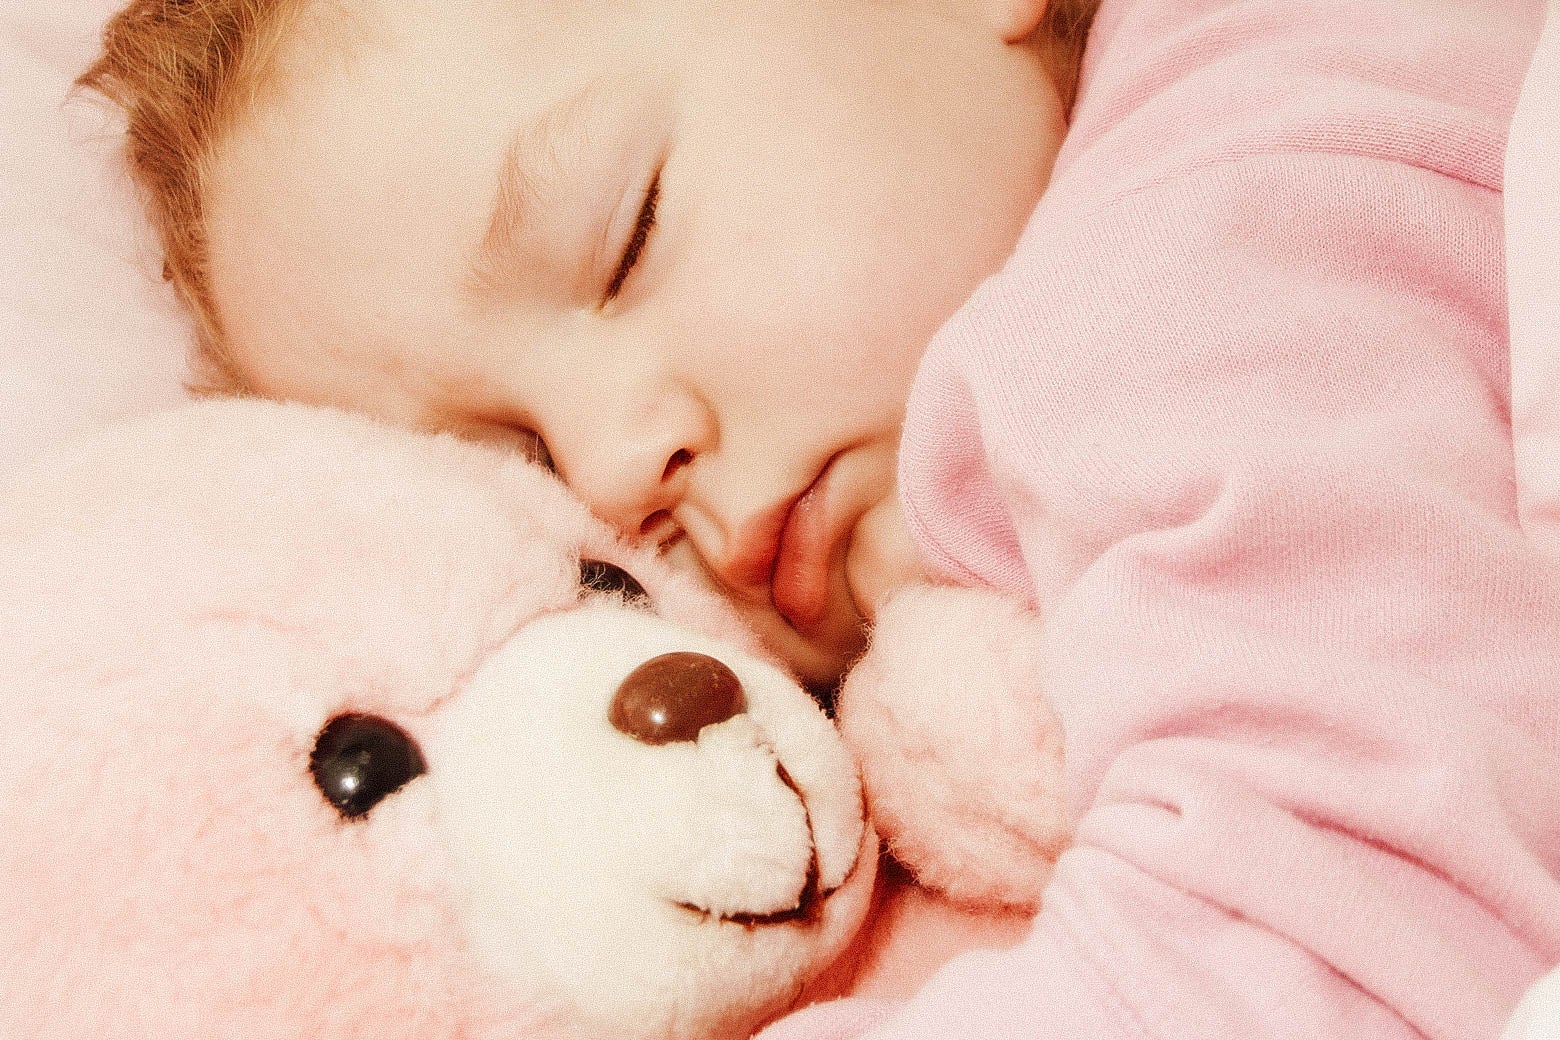 A child in bed with a teddy bear.